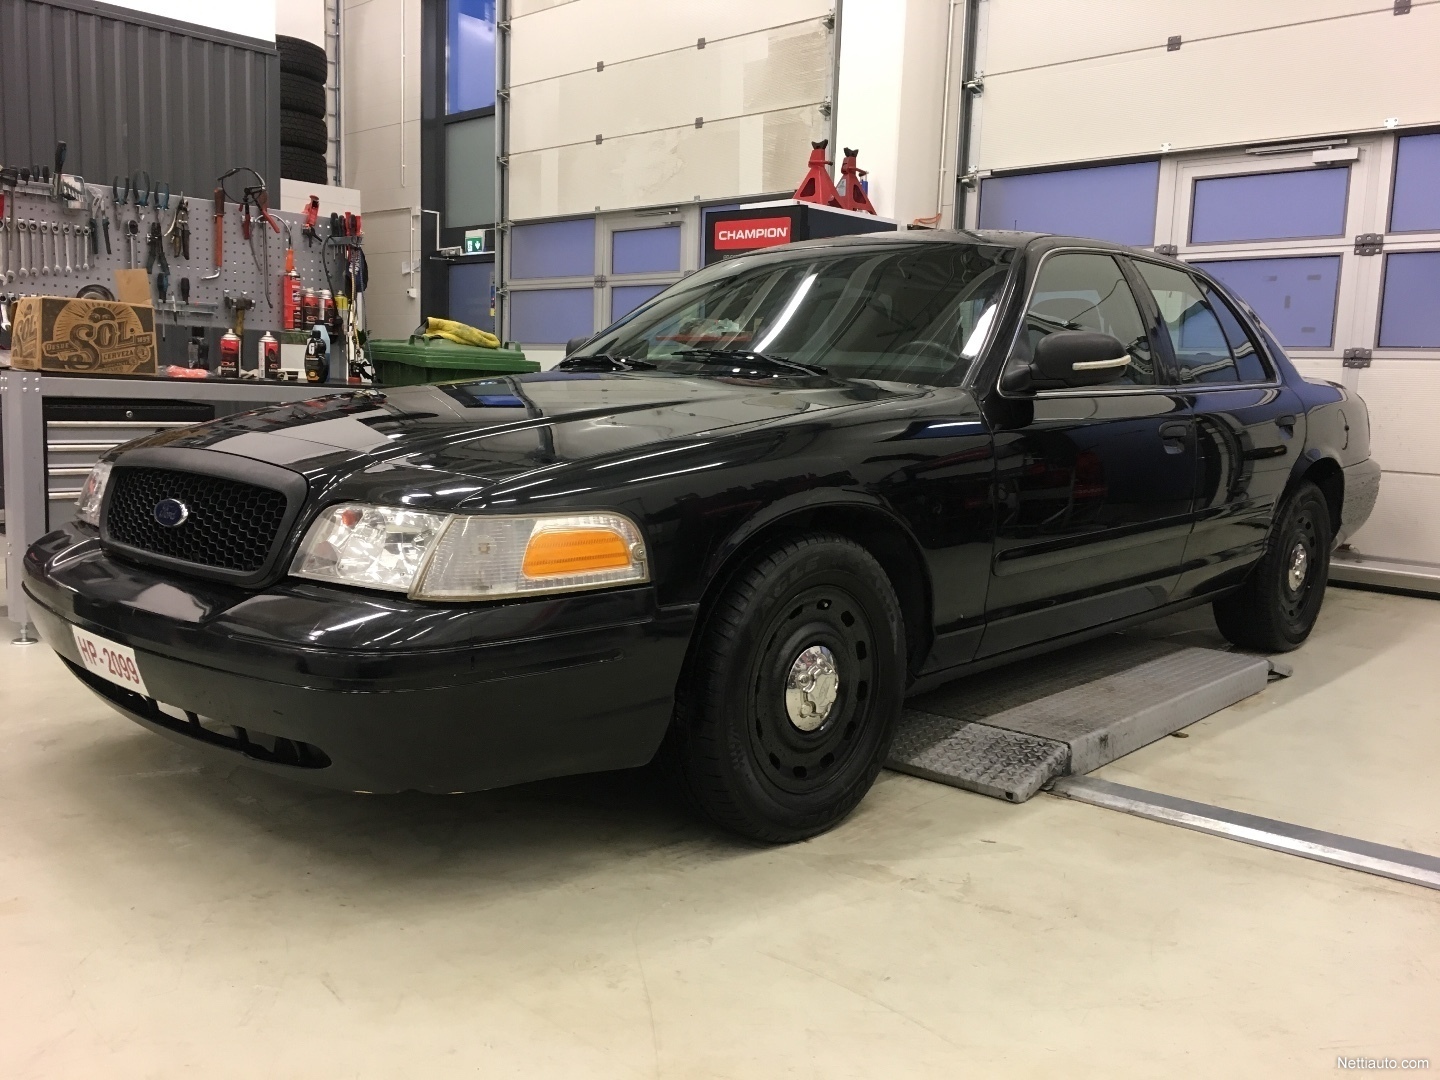 Ford Crown Vic 2021 - 2020 Ford Crown Victoria Price Release Date